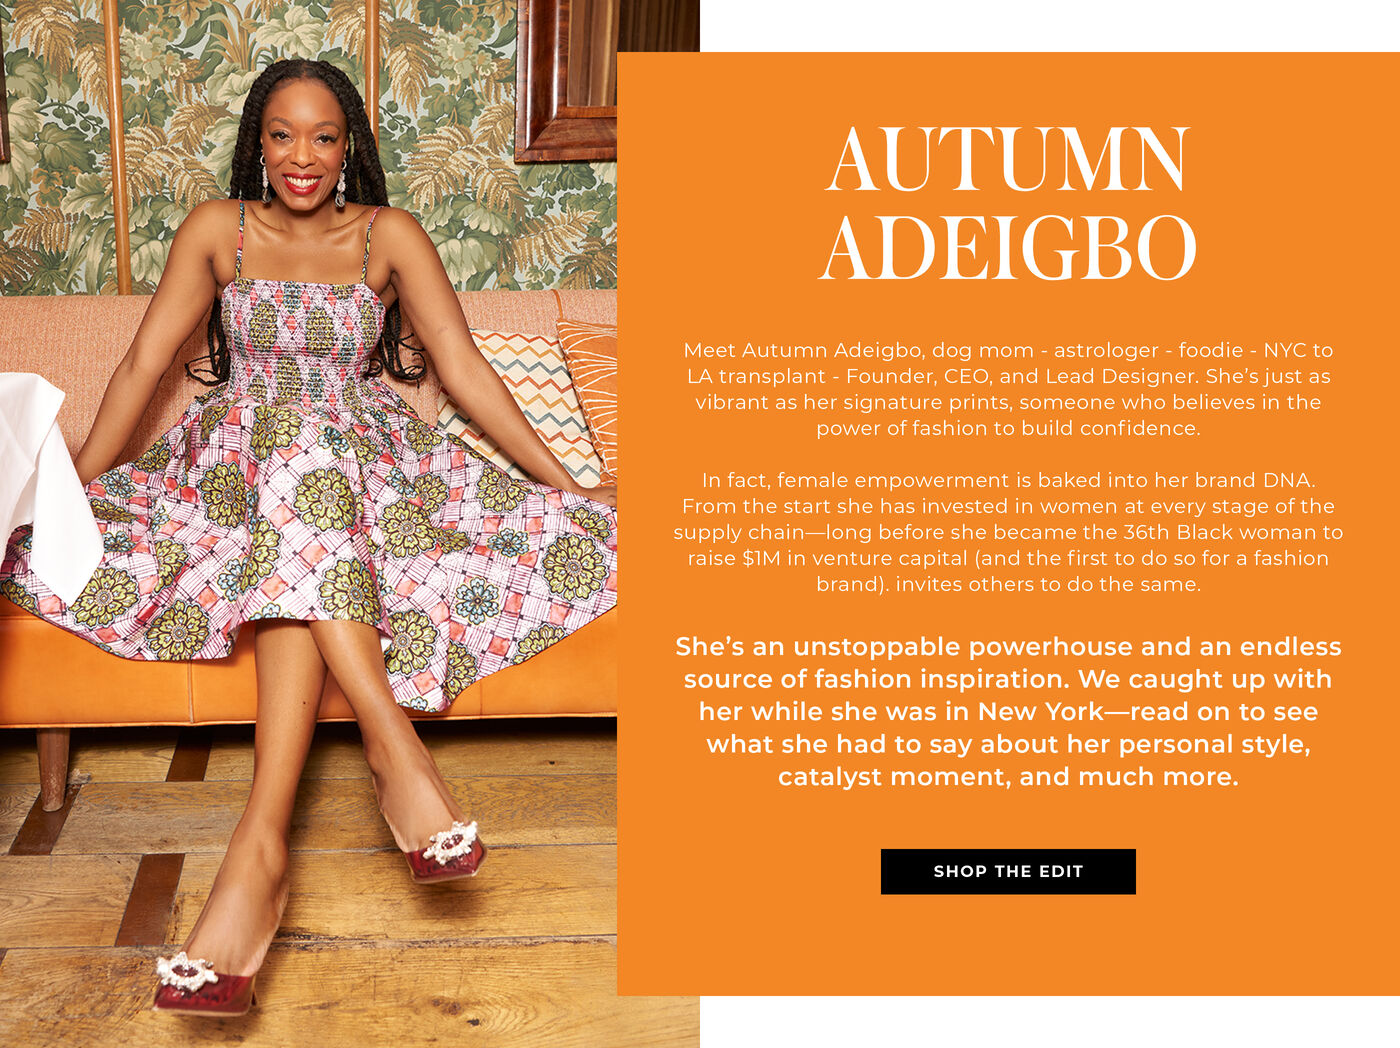 "Meet Autumn Adeigbo, dog mom - astrologer - foodie - NYC to LA transplant - Founder, CEO, and Lead Designer. She’s just as vibrant as her signature prints, someone who believes in the power of fashion to build confidence.   In fact, female empowerment is baked into her brand DNA. From the start she has invested in women at every stage of the supply chain—long before she became the 36th Black woman to raise $1M in venture capital (and the first to do so for a fashion brand).   She’s an unstoppable powerhouse and an endless source of fashion inspiration. We caught up with her while she was in New York—read on to see what she had to say about her personal style, catalyst moment, and much more."